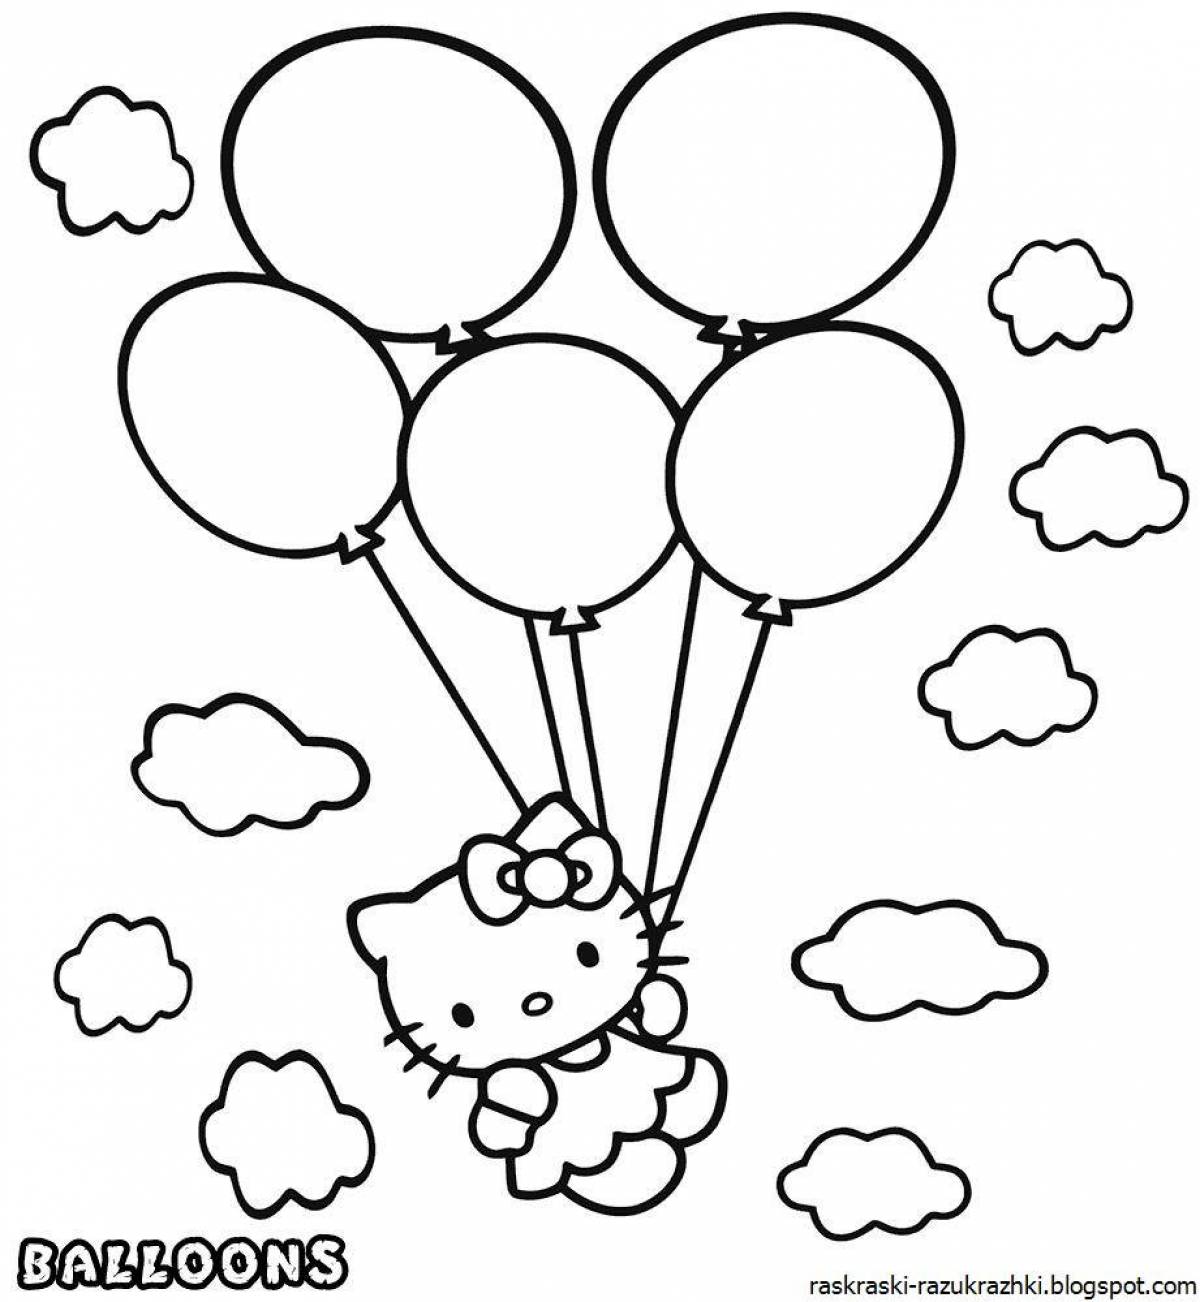 Glamorous balloons coloring book for kids